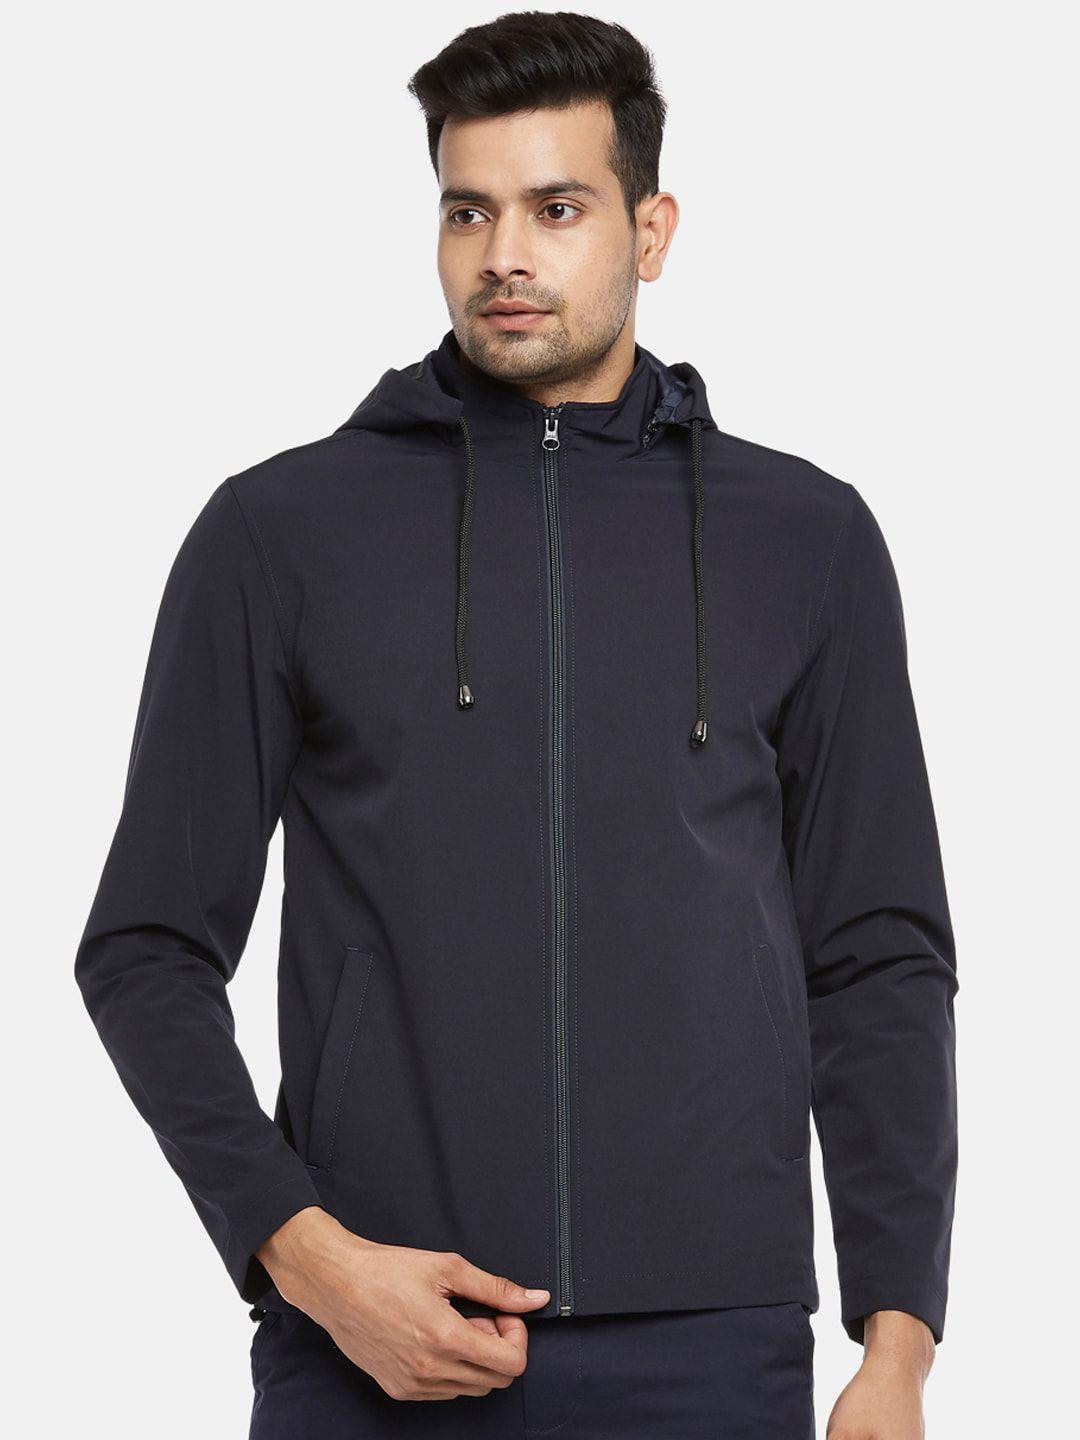 byford-by-pantaloons-men-navy-blue-hooded-sporty-jacket